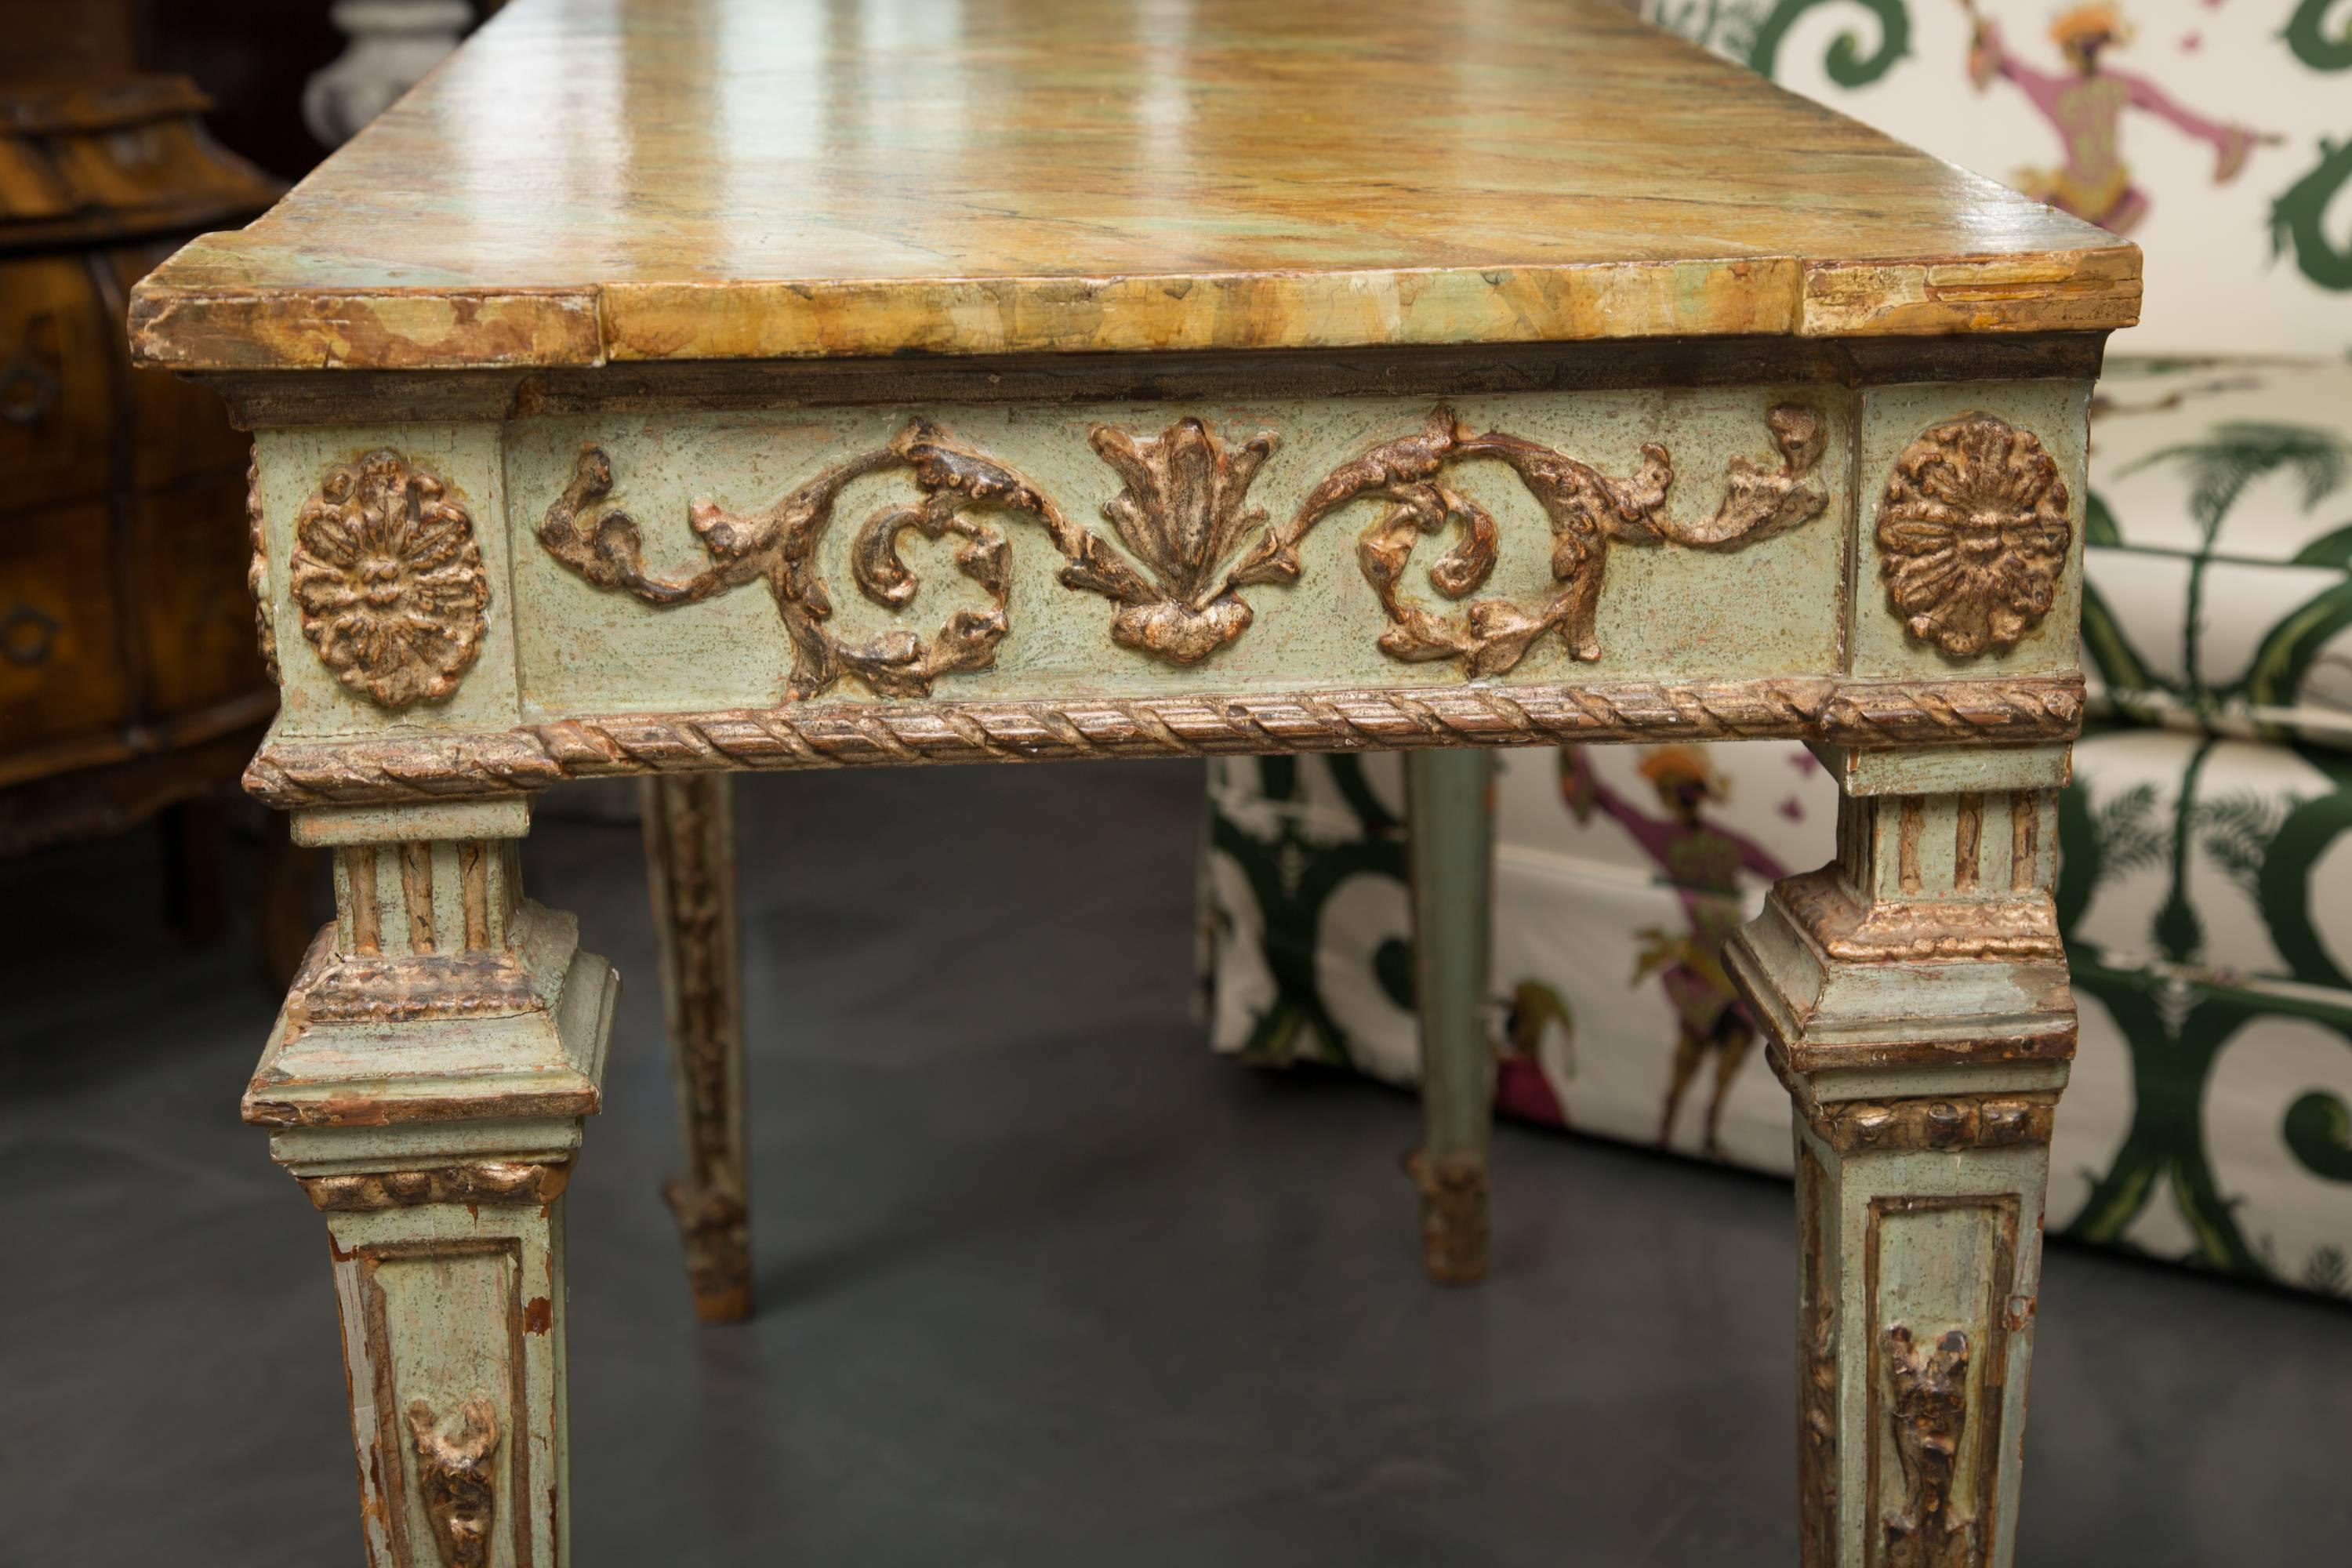 Ultra 'old world' sophistication radiates from this magnificent light green painted and parcel gilt rectangular console table. The table has a faux marble top over a gilt-embossed freize and supported by square tapering legs with a similar motif.